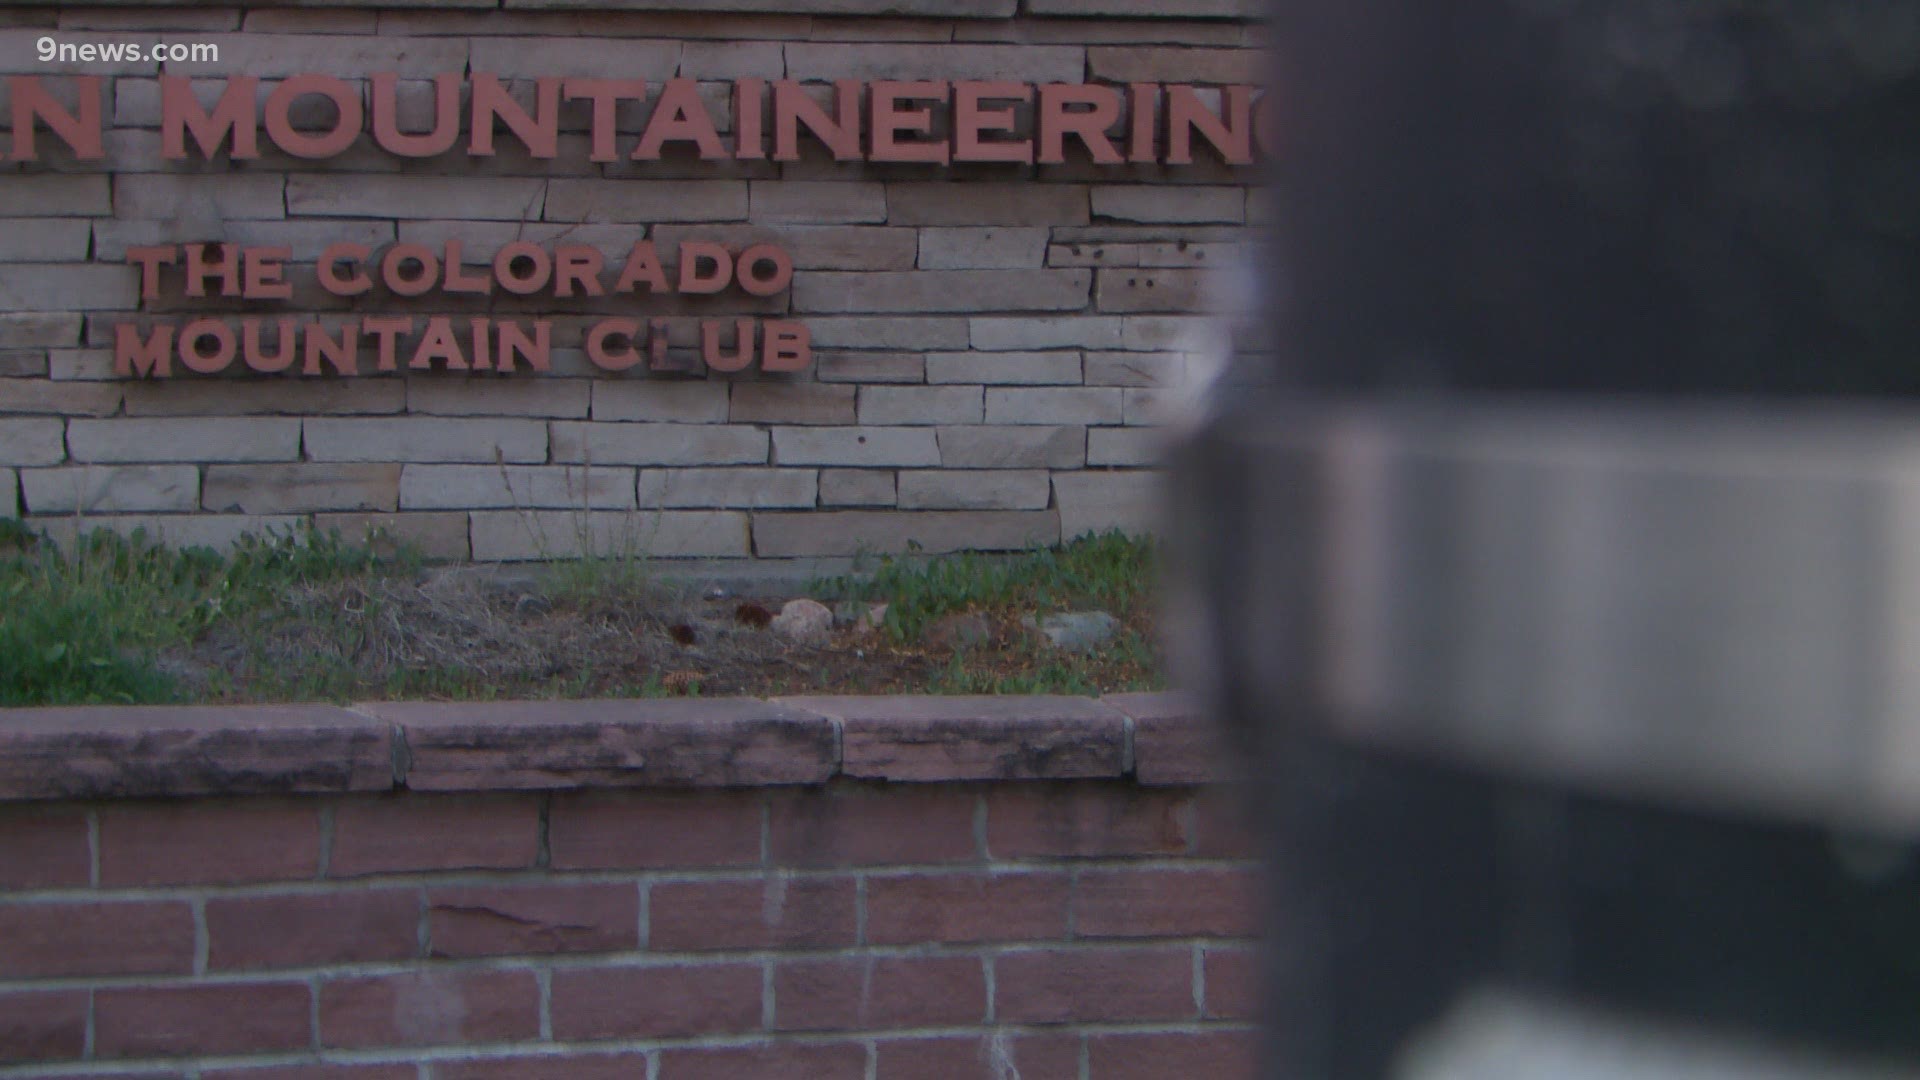 The Colorado Mountain Club said it learned of former employee Chun Min Chiang using secret cameras when police began investigating in September 2020.